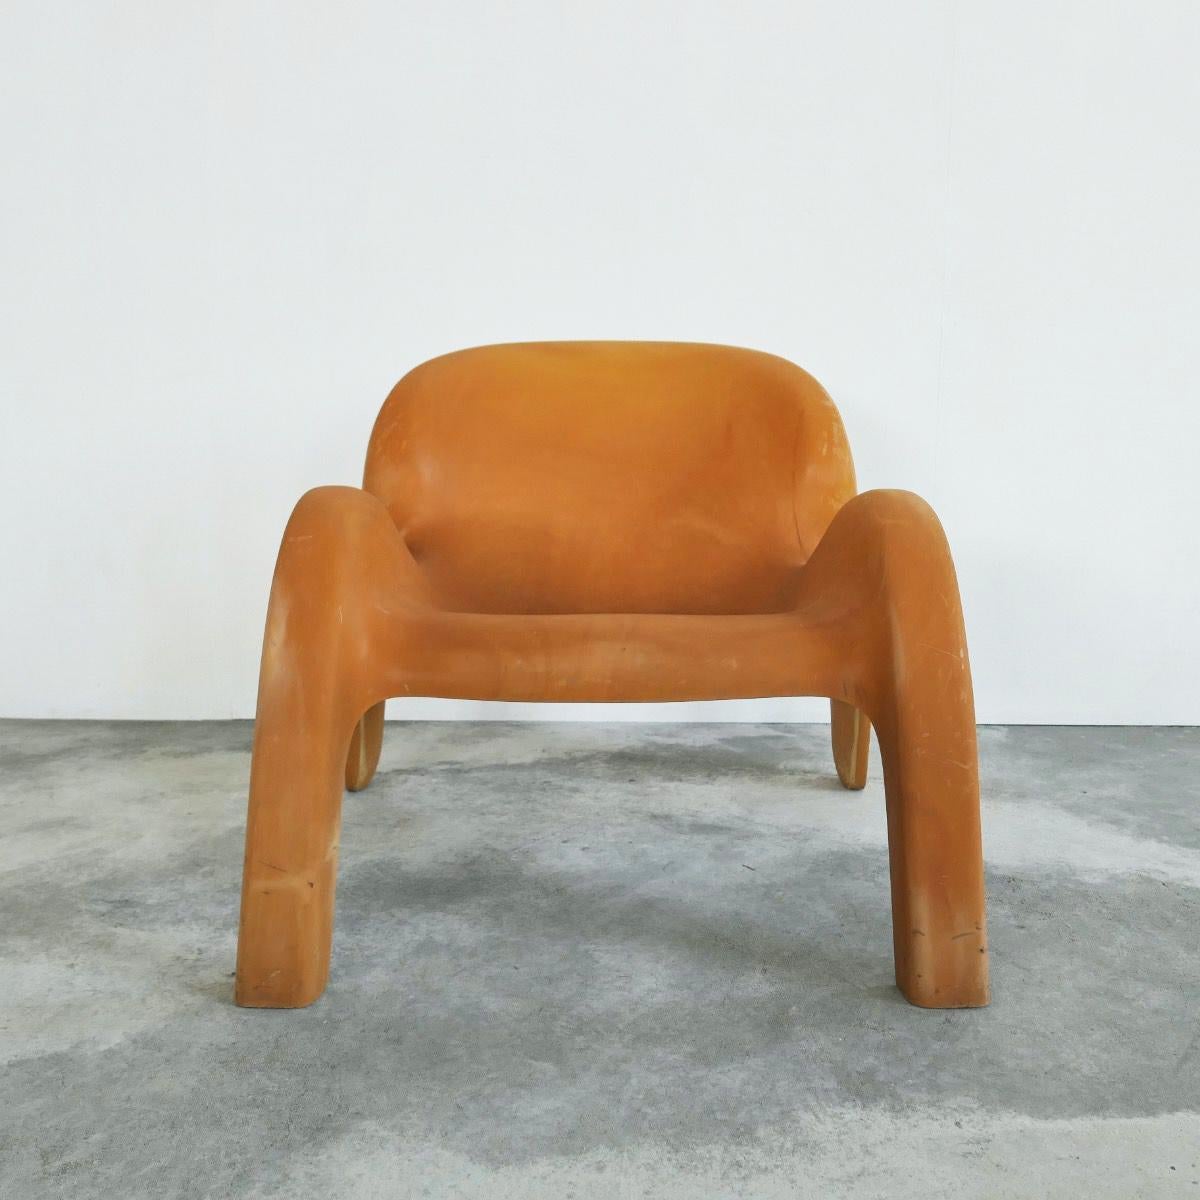 Peter Ghyczy GN2 vintage ocher yellow lounge chair. Late 20th century.

Beautiful vintage design lounge chair by Peter Ghyczy. A great space-age design in moulded polyurethane, for both outside and inside use.

The faded and patinated orange